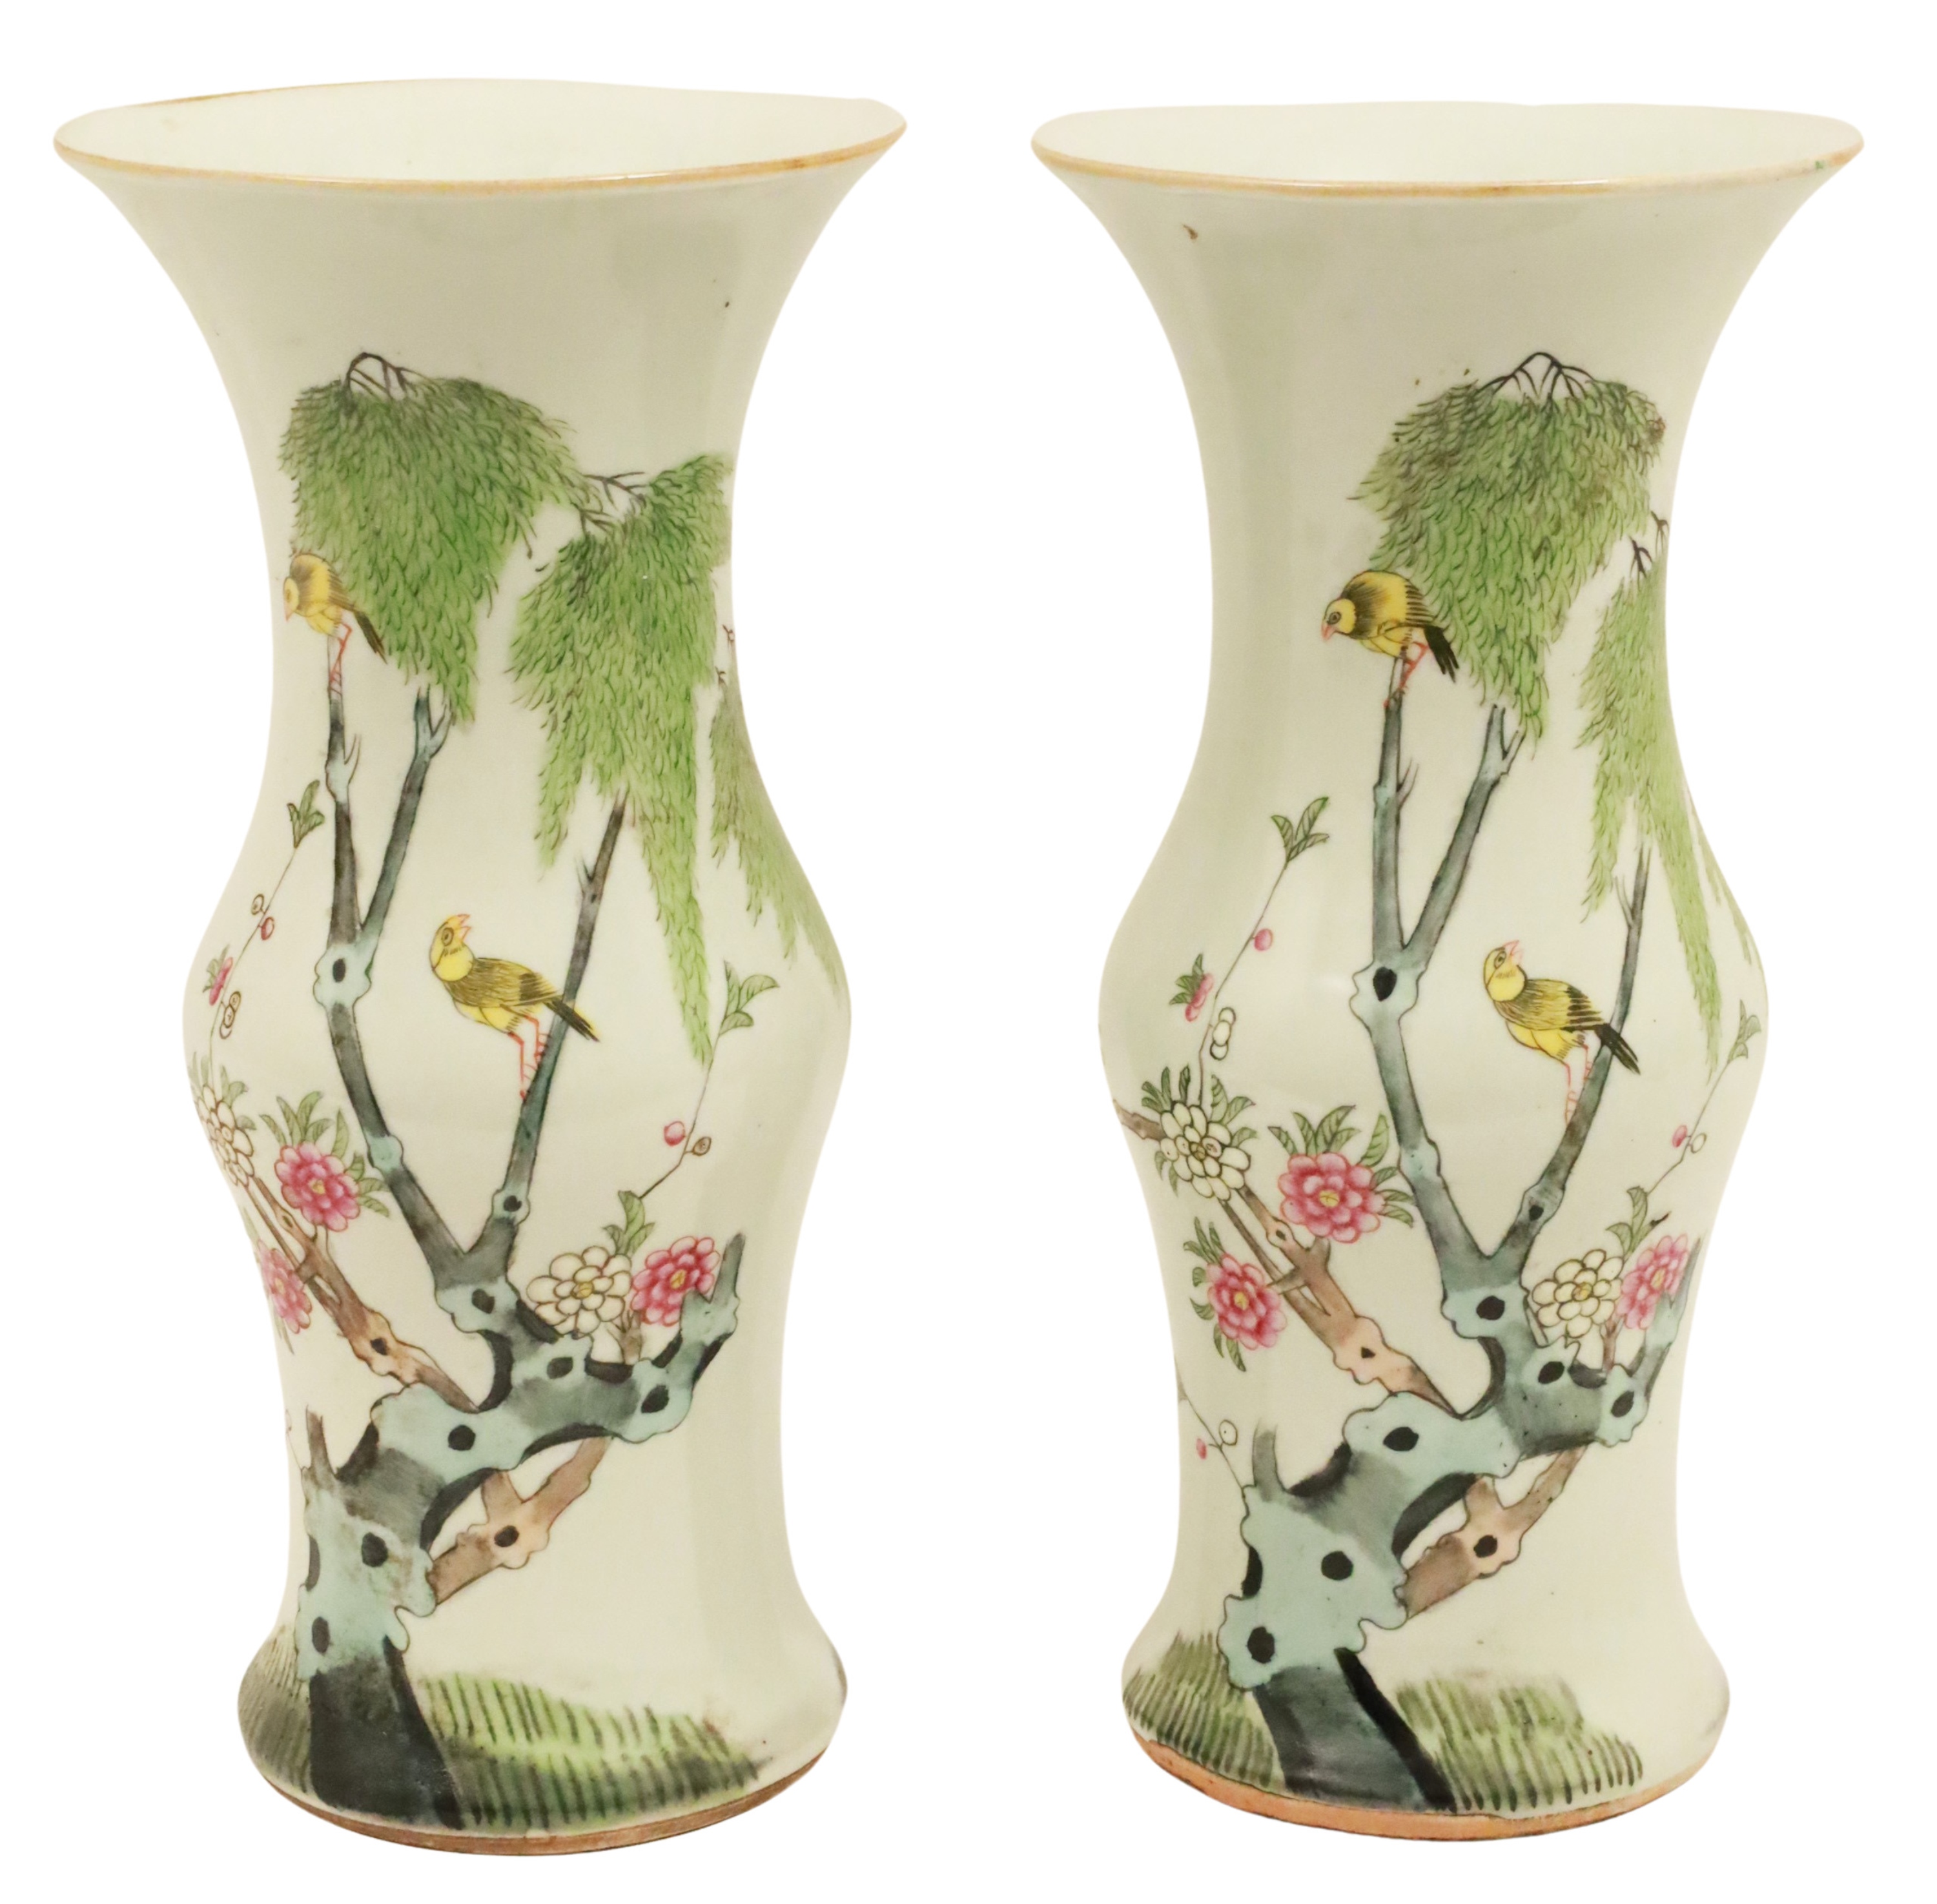 PAIR OF CHINESE QIANJIANG VASES 2f8b77